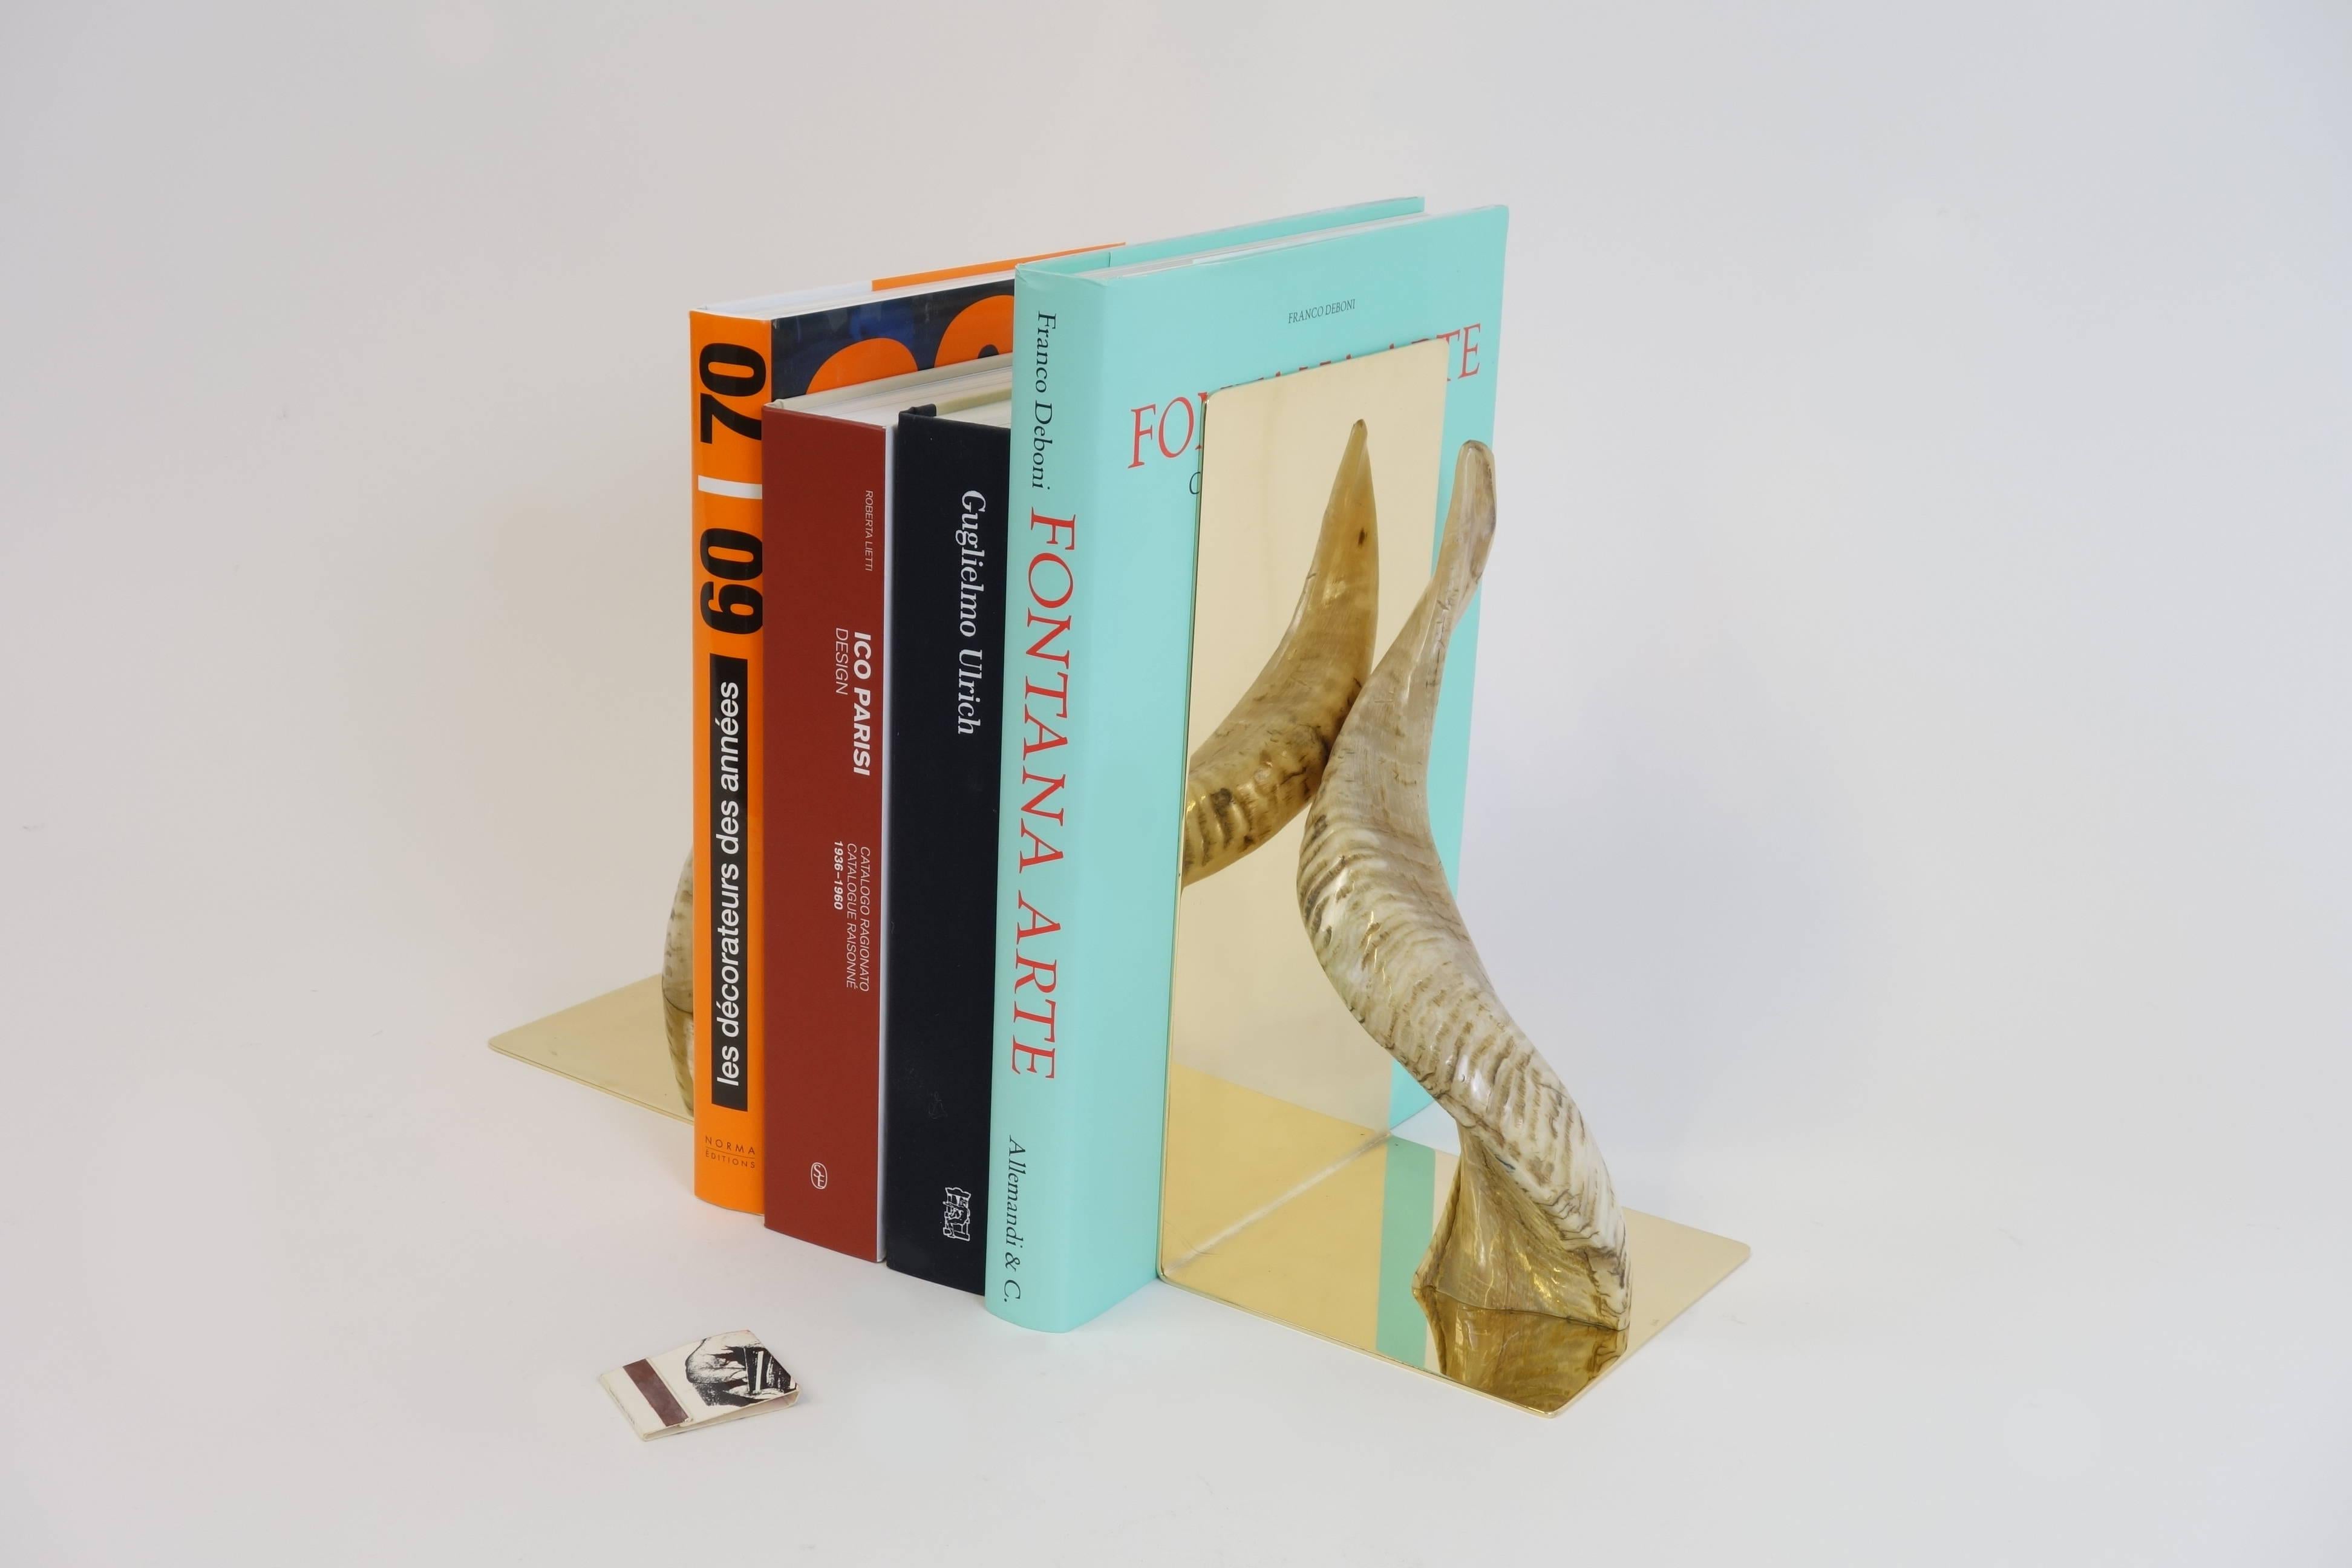 A pair of plus sized bookends created and manufactured by the Austrian architect and designer Carl Auböck. These outstanding objects made of solid brass will provide understated luxury on each bookshelf. The curves as well as their mild hue offer a